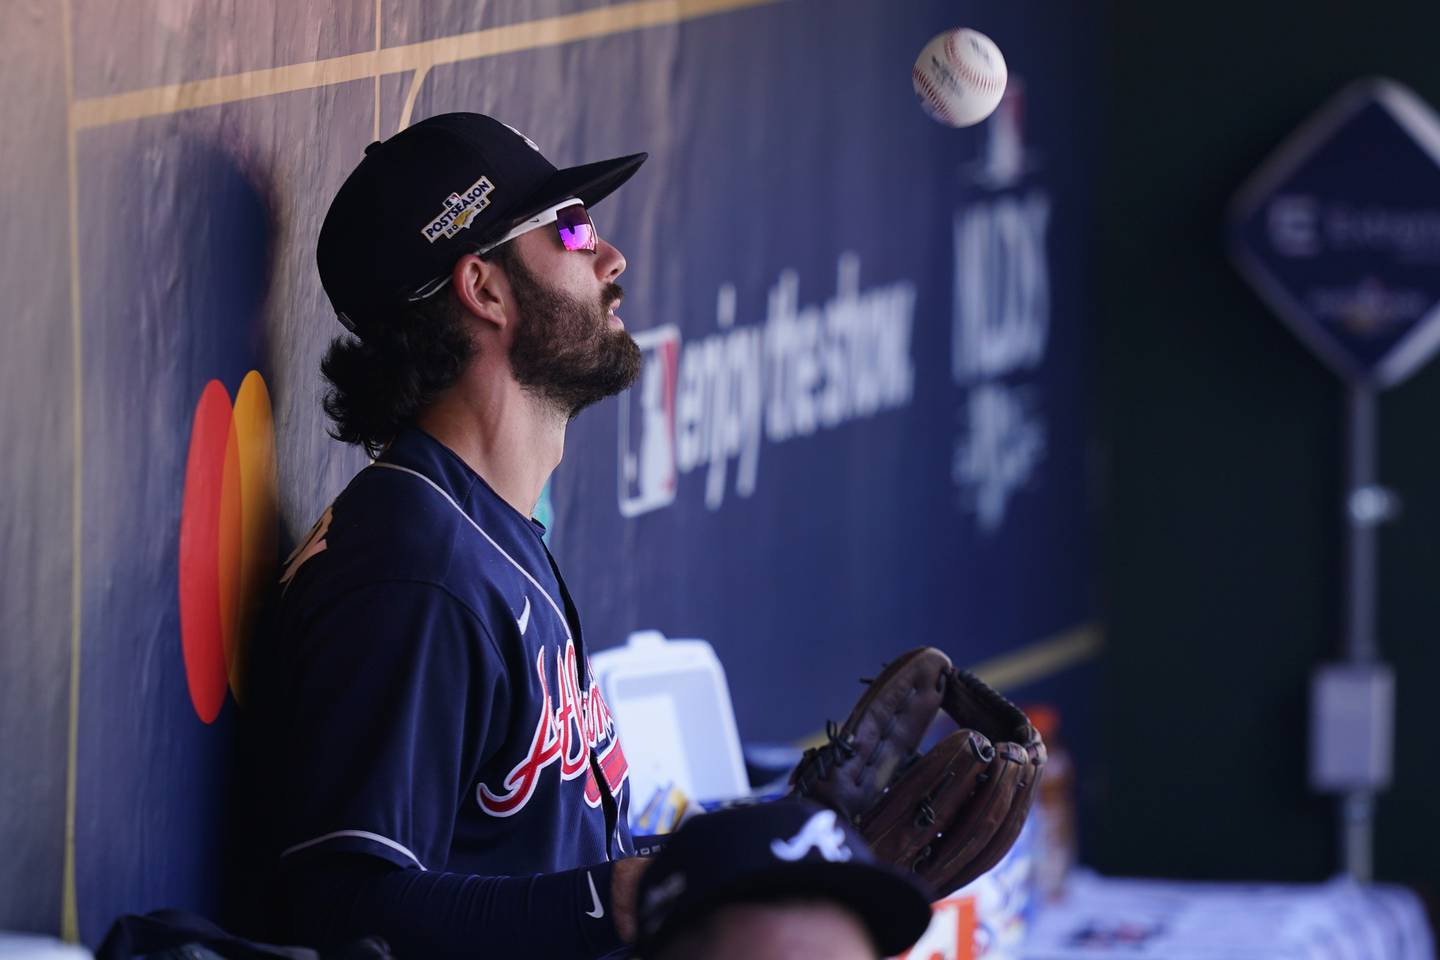 The Braves' Dansby Swanson tosses a ball in the dugout before a playoff game on Oct. 15, 2022, in Philadelphia.